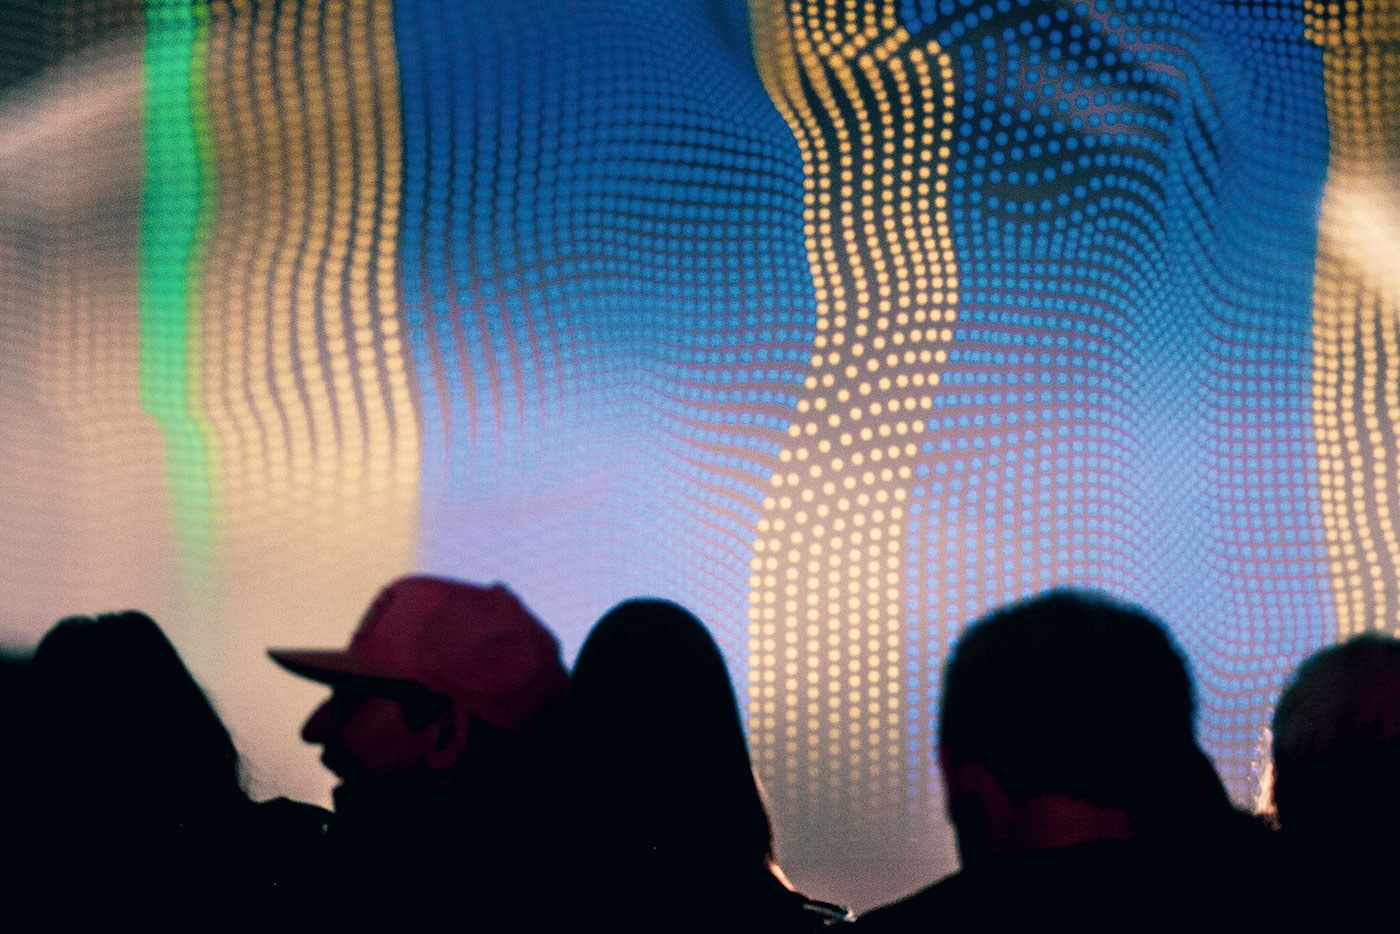 Crowd of people in silhouette infront of abstract projection